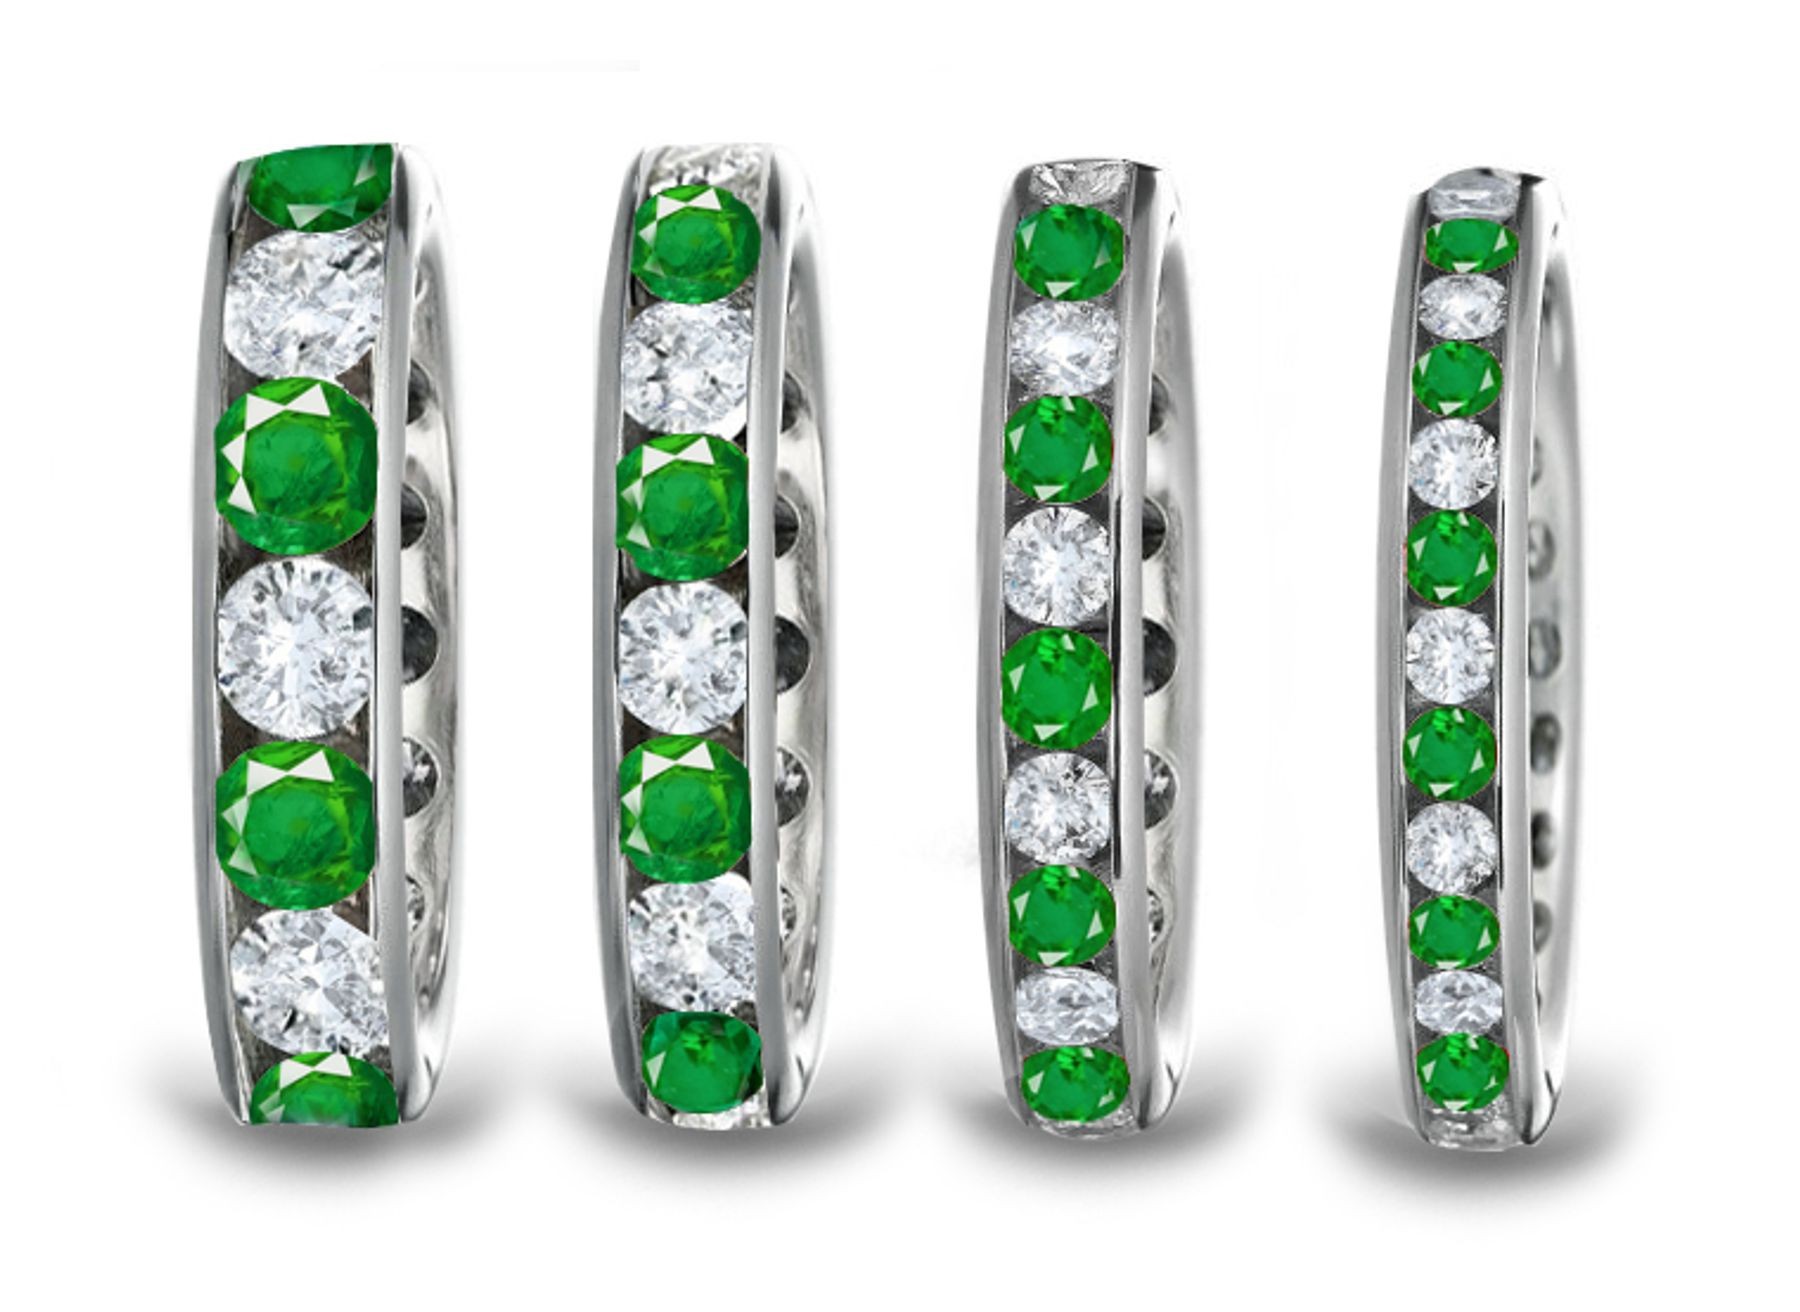 Marvelous Women's Emerald Anniversary Ring: 24 Round emeralds and diamonds channel set in metal of your choice.